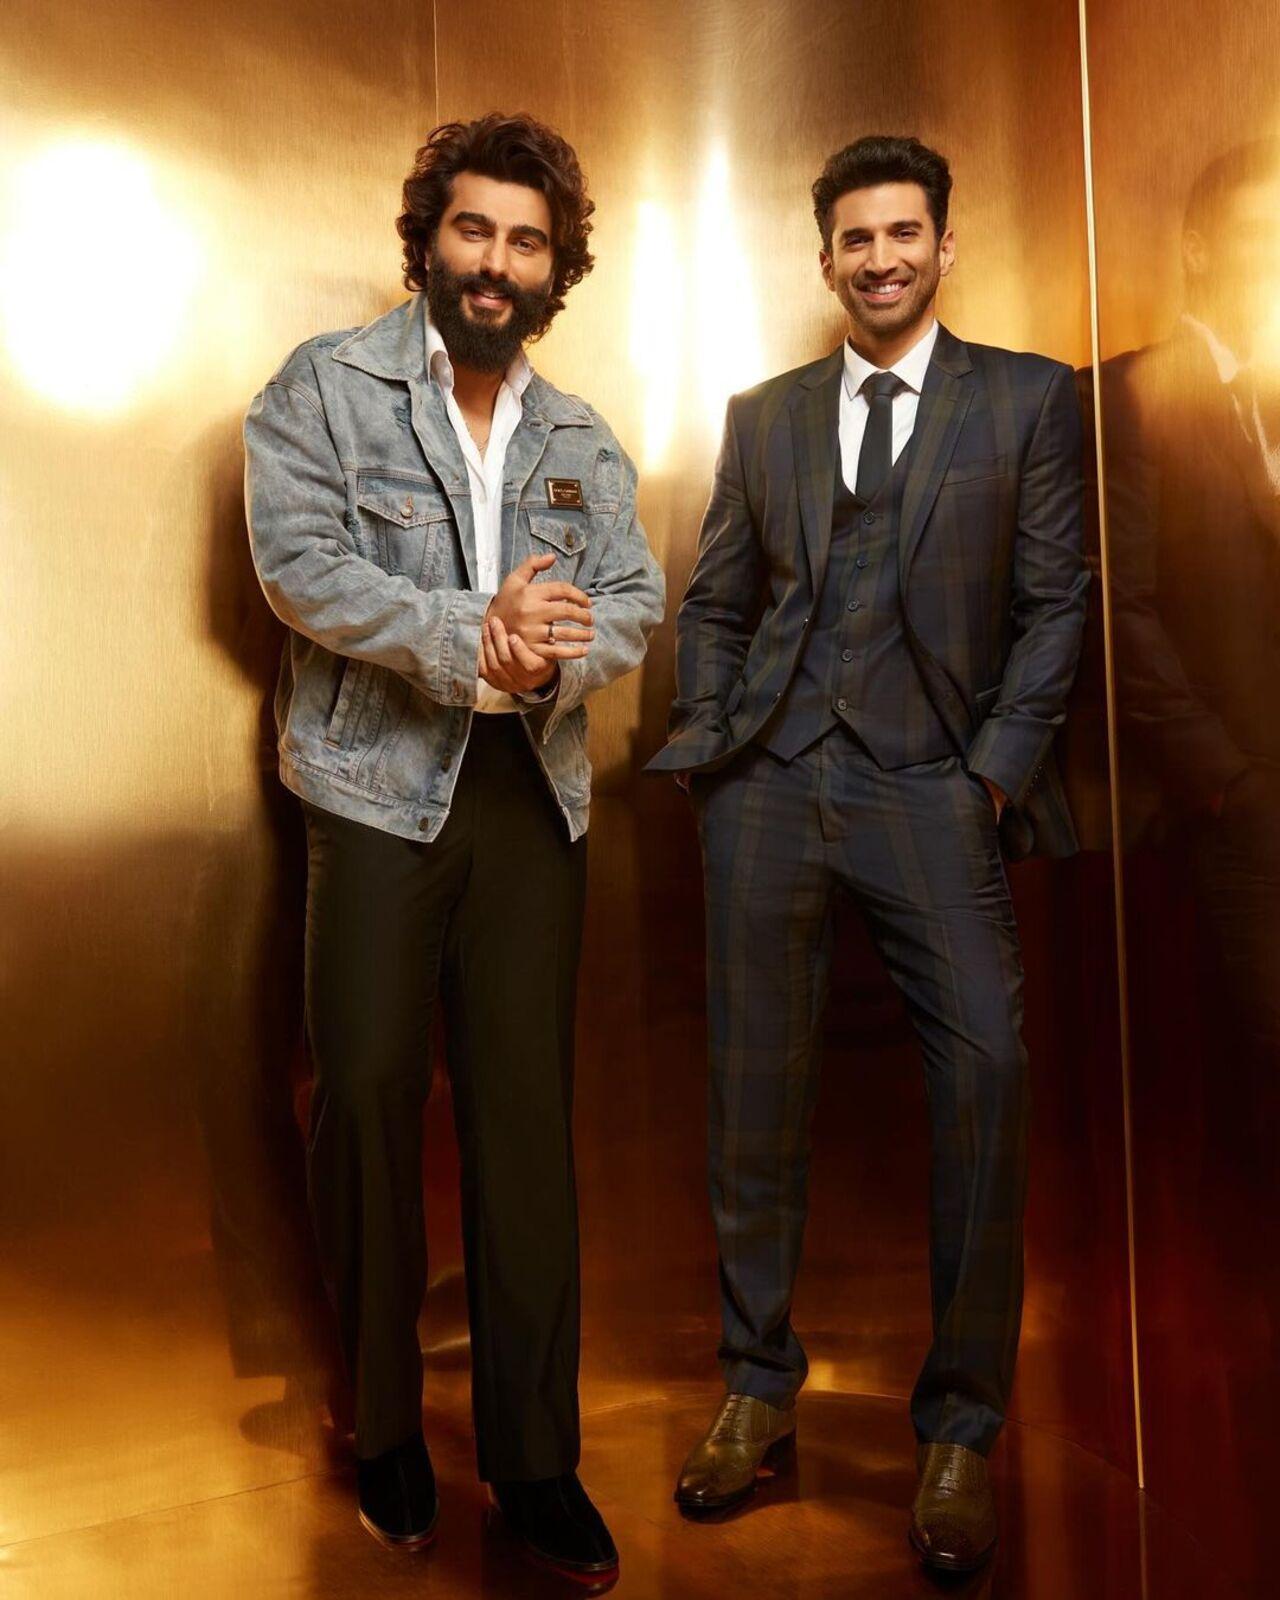 On the episode, Karan Johar revealed that they have a boys club which includes Aditya, Arjun and even Ranbir Kapoor. Johar said that when the boys get together Aditya often become the glorious, gorgeous punching bag as Ranbir belives that he knows nothing about anything